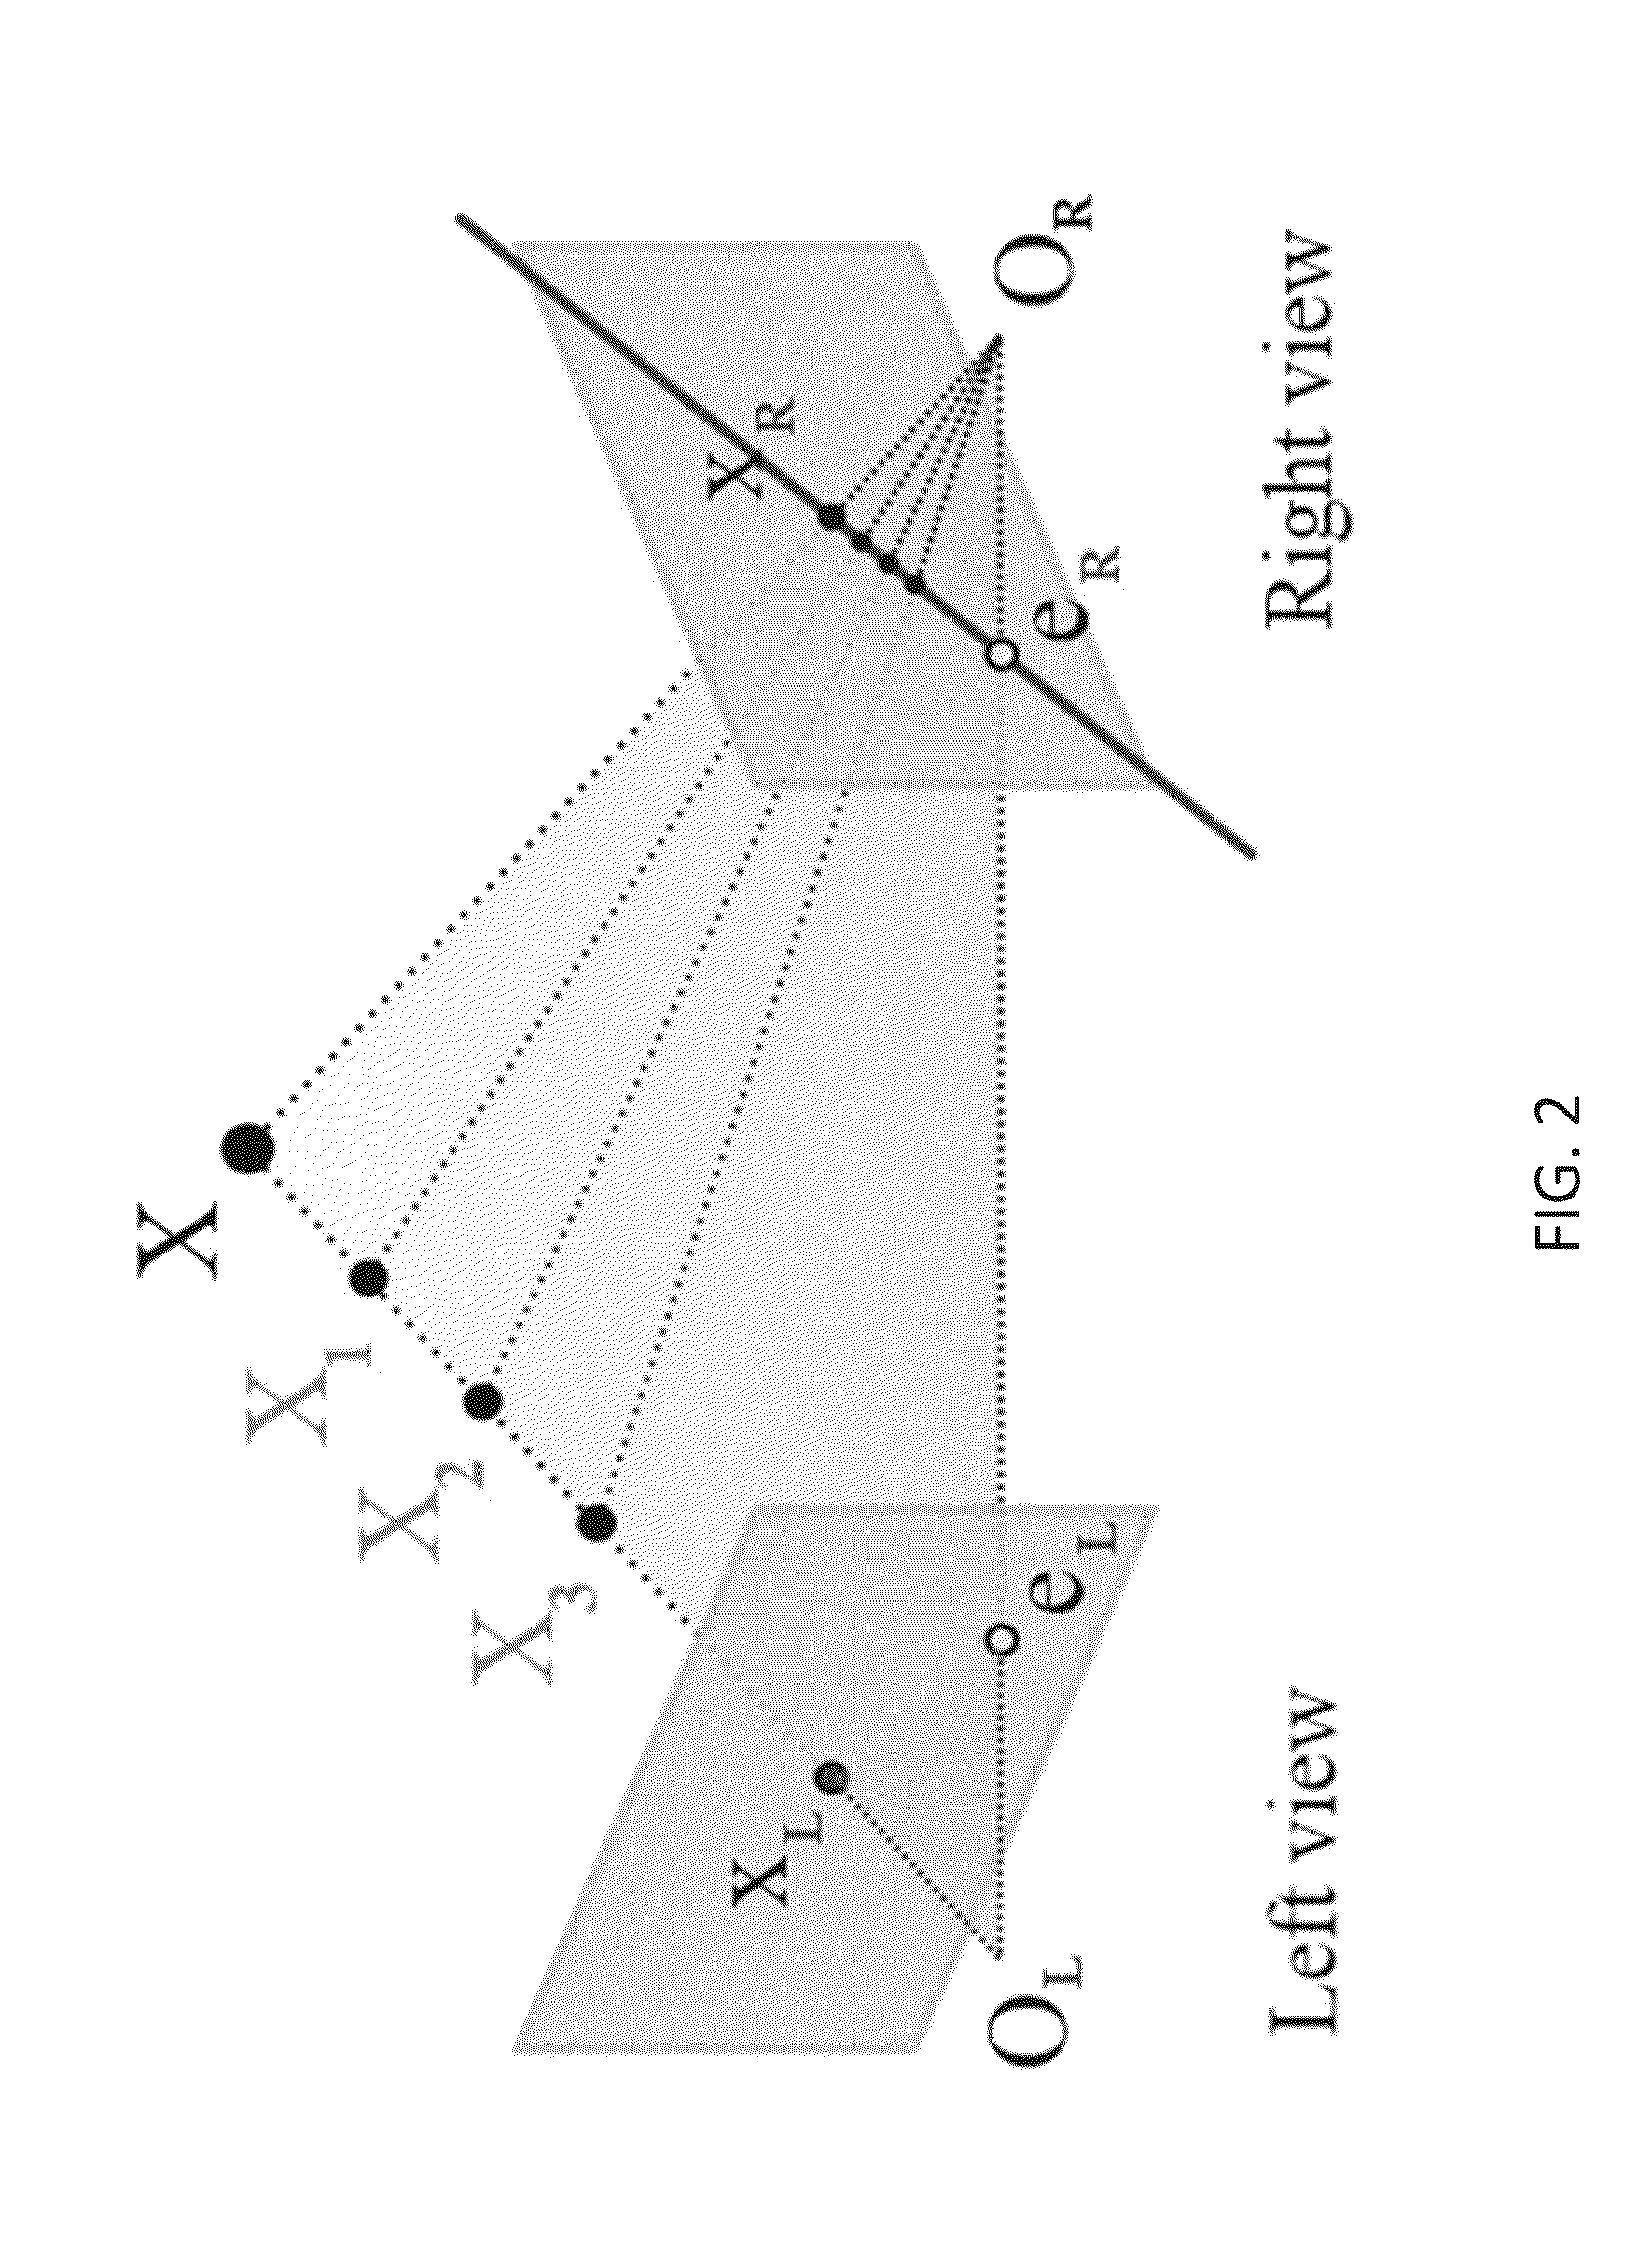 Particle tracking system and method